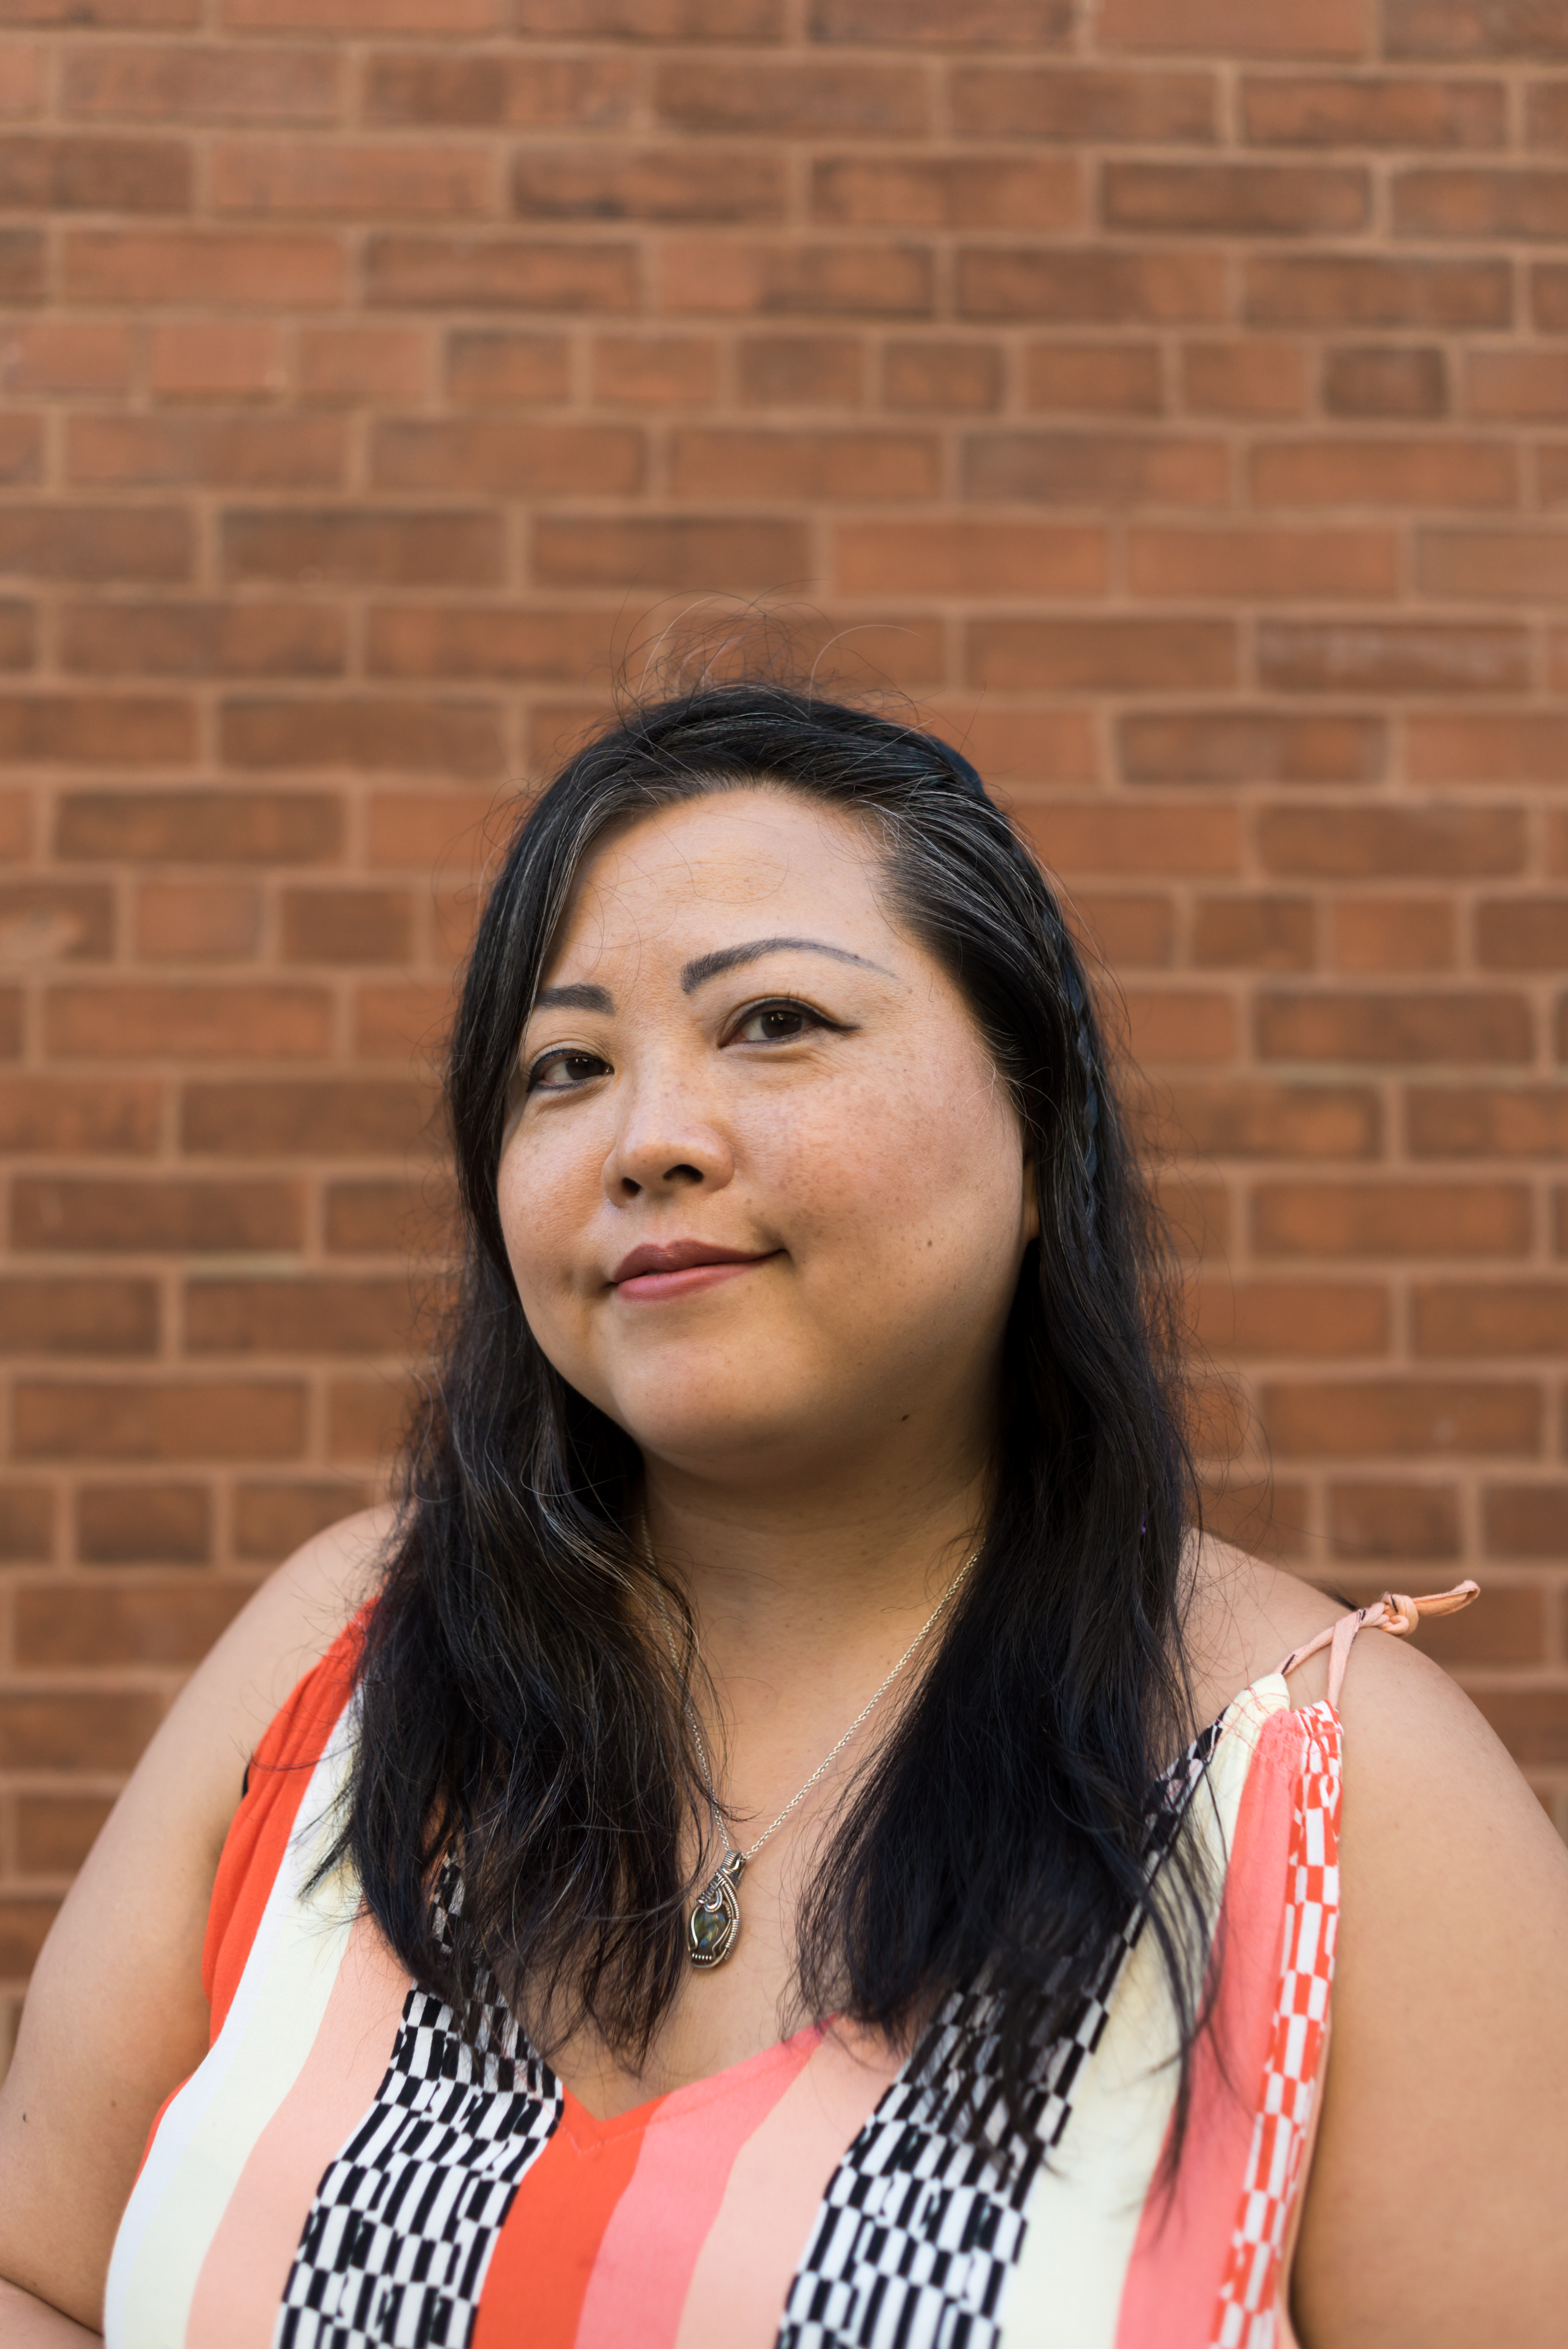 Image: A portrait of the artist Sarah-Ji standing in front of a brick wall wearing a patterned dress. She looks directly at the camera with a slight smile. Portrait taken by Ireashia Bennett.